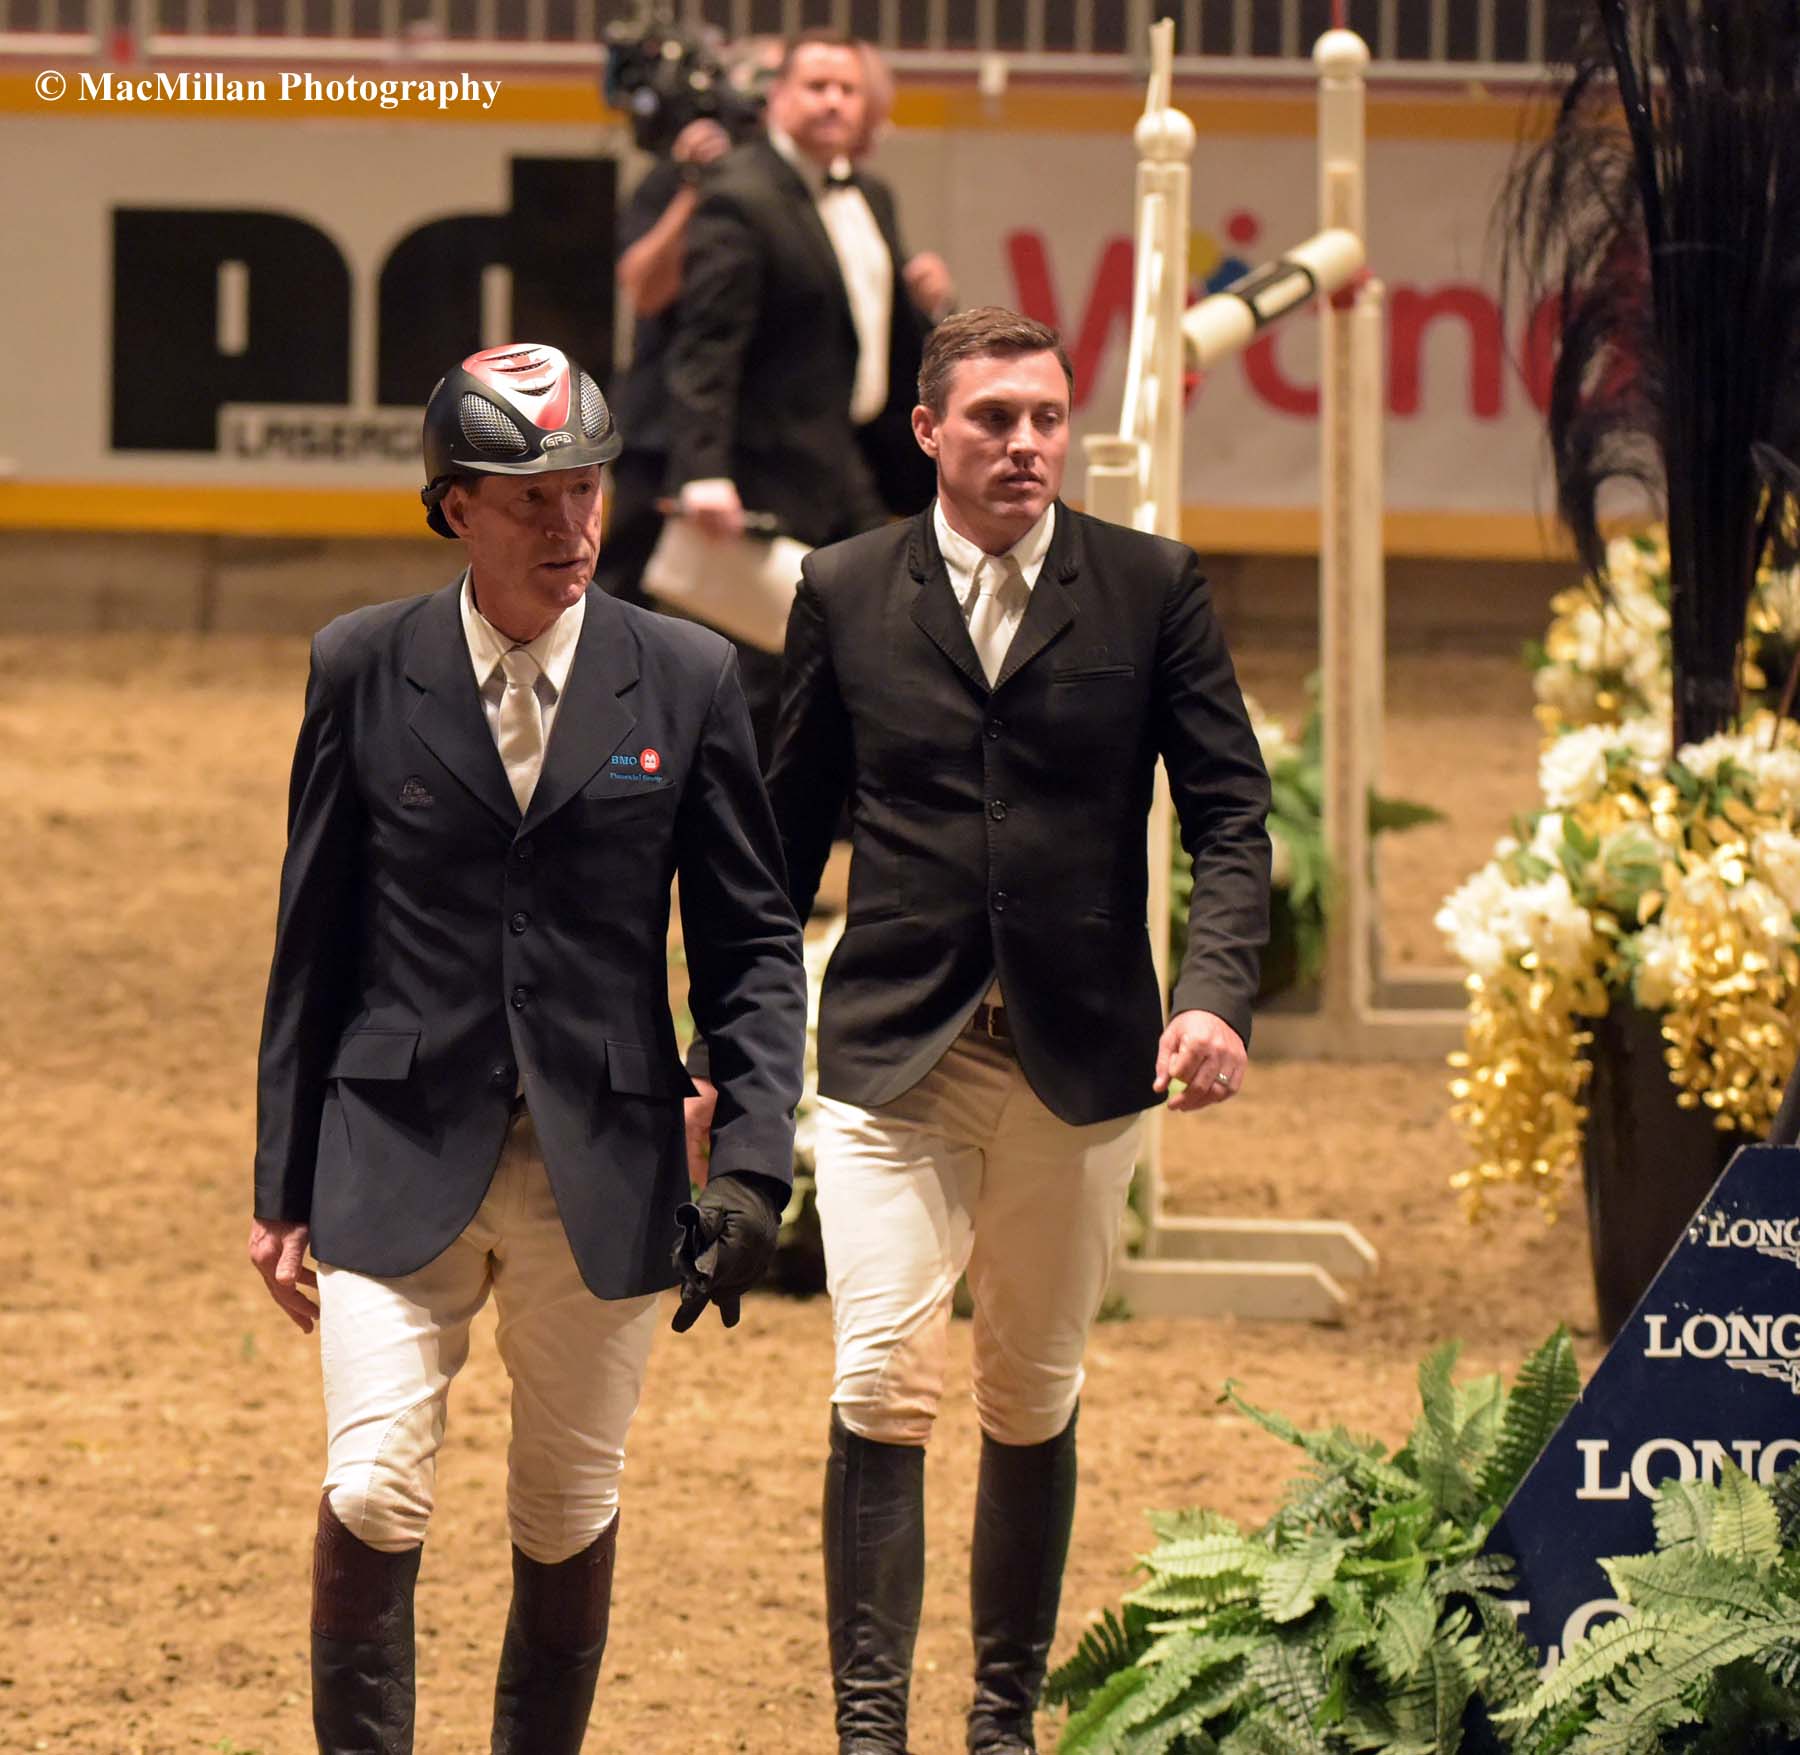 Photo 9 – Canadian jumper rider stars Ian Millar (foreground) and Chris Sorenson on their course walk before the $75,000 Big Ben Challenge at the 2015 Royal Winter Fair. Millar is known affectionately as “Captain Canada” having ridden in ten Olympic Games representing Canada thus far.Photo by Kim MacMillan/MacMillan Photography